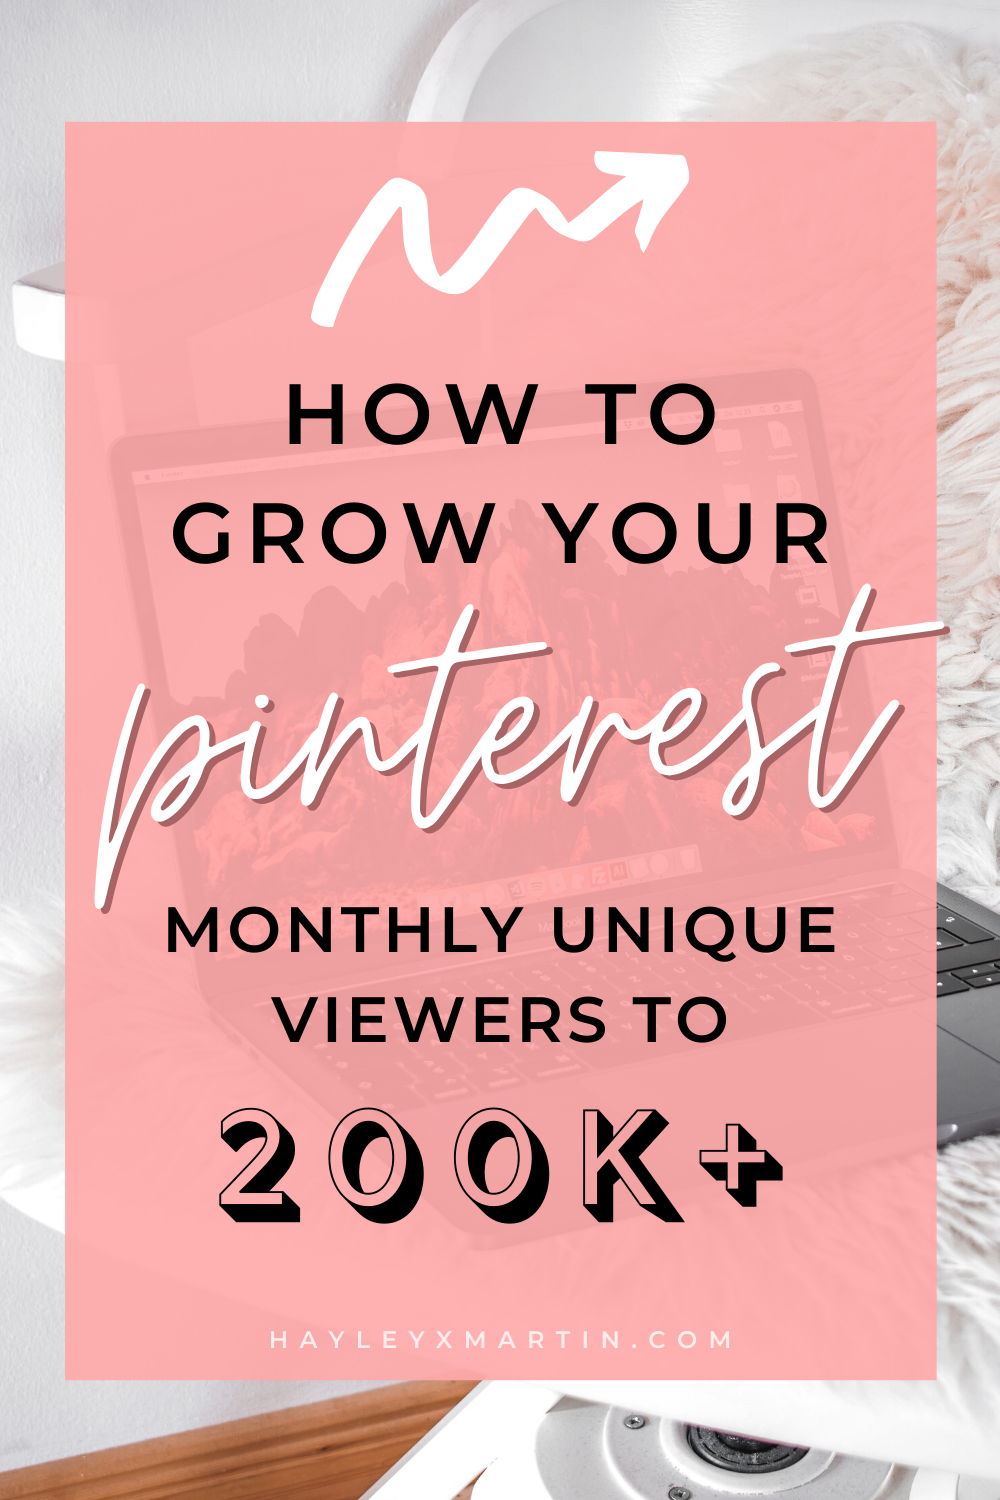 HOW TO GROW YOUR PINTEREST MONTHLY UNIQUE VIEWERS TO 200K+